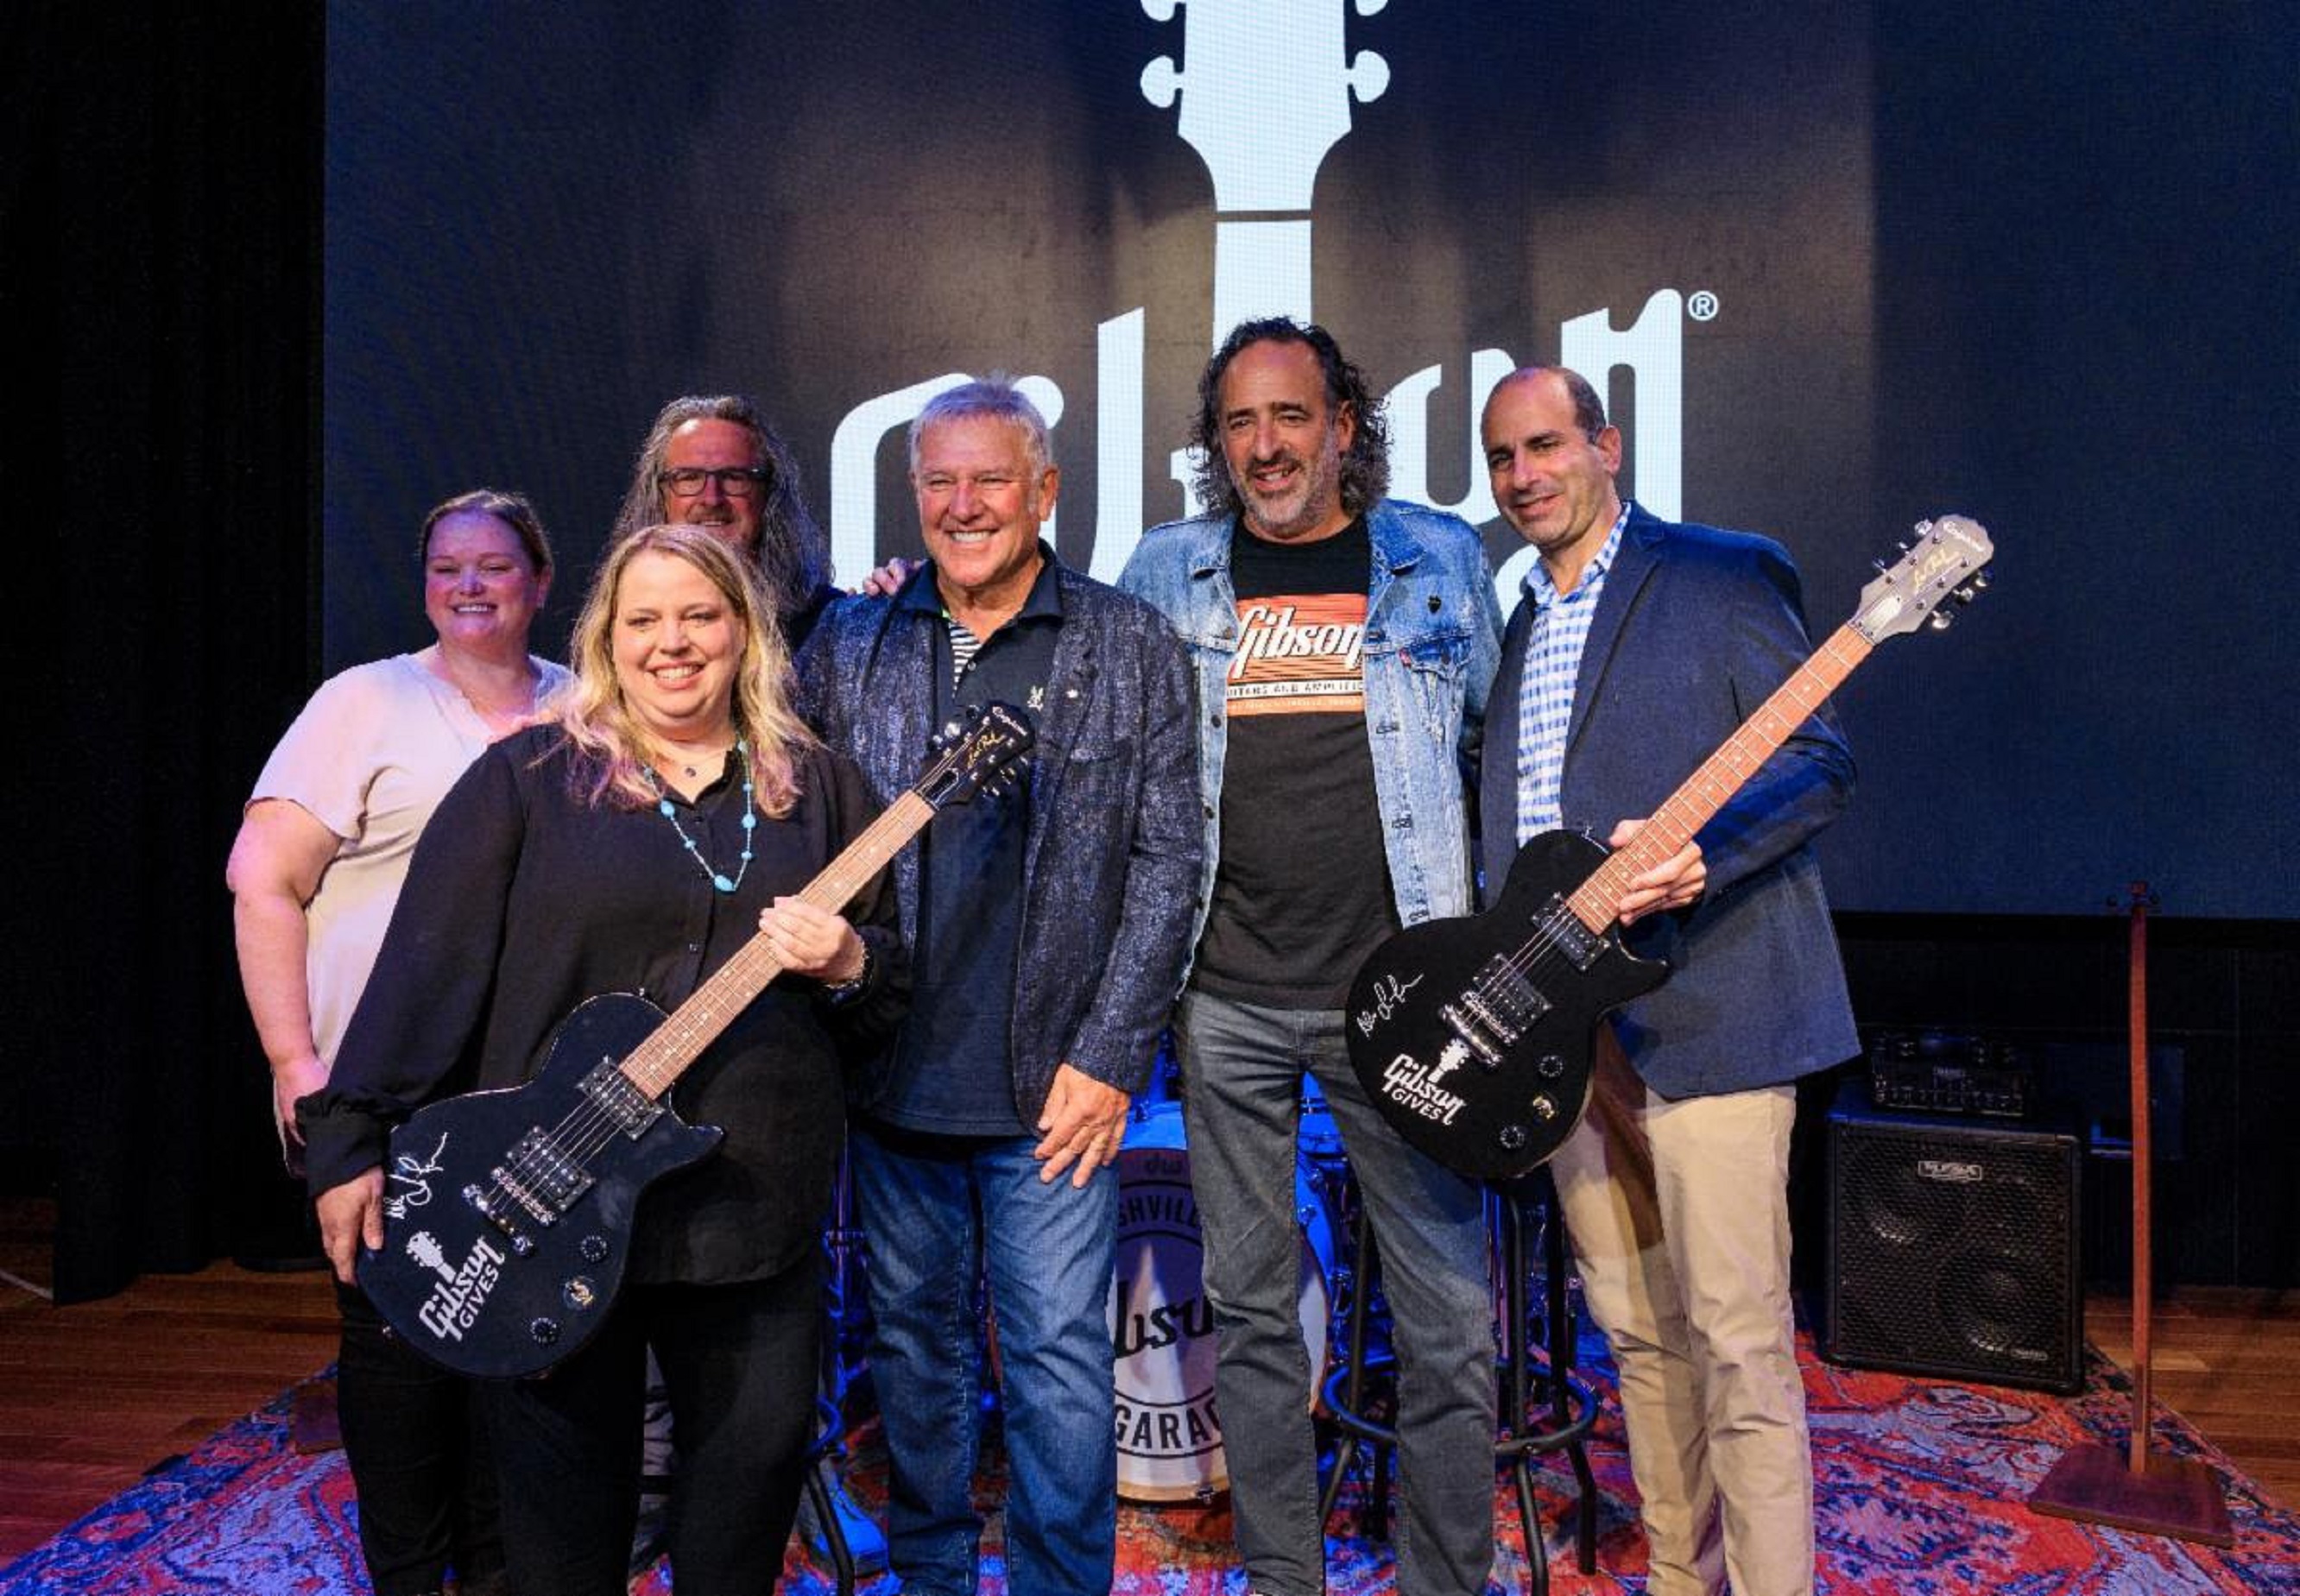 RUSH Lead Guitarist and Rock & Roll Legend Alex Lifeson and Gibson Gives Donate Funds to Monroe Carell Jr. Children’s Hospital at Vanderbilt and Room In The Inn